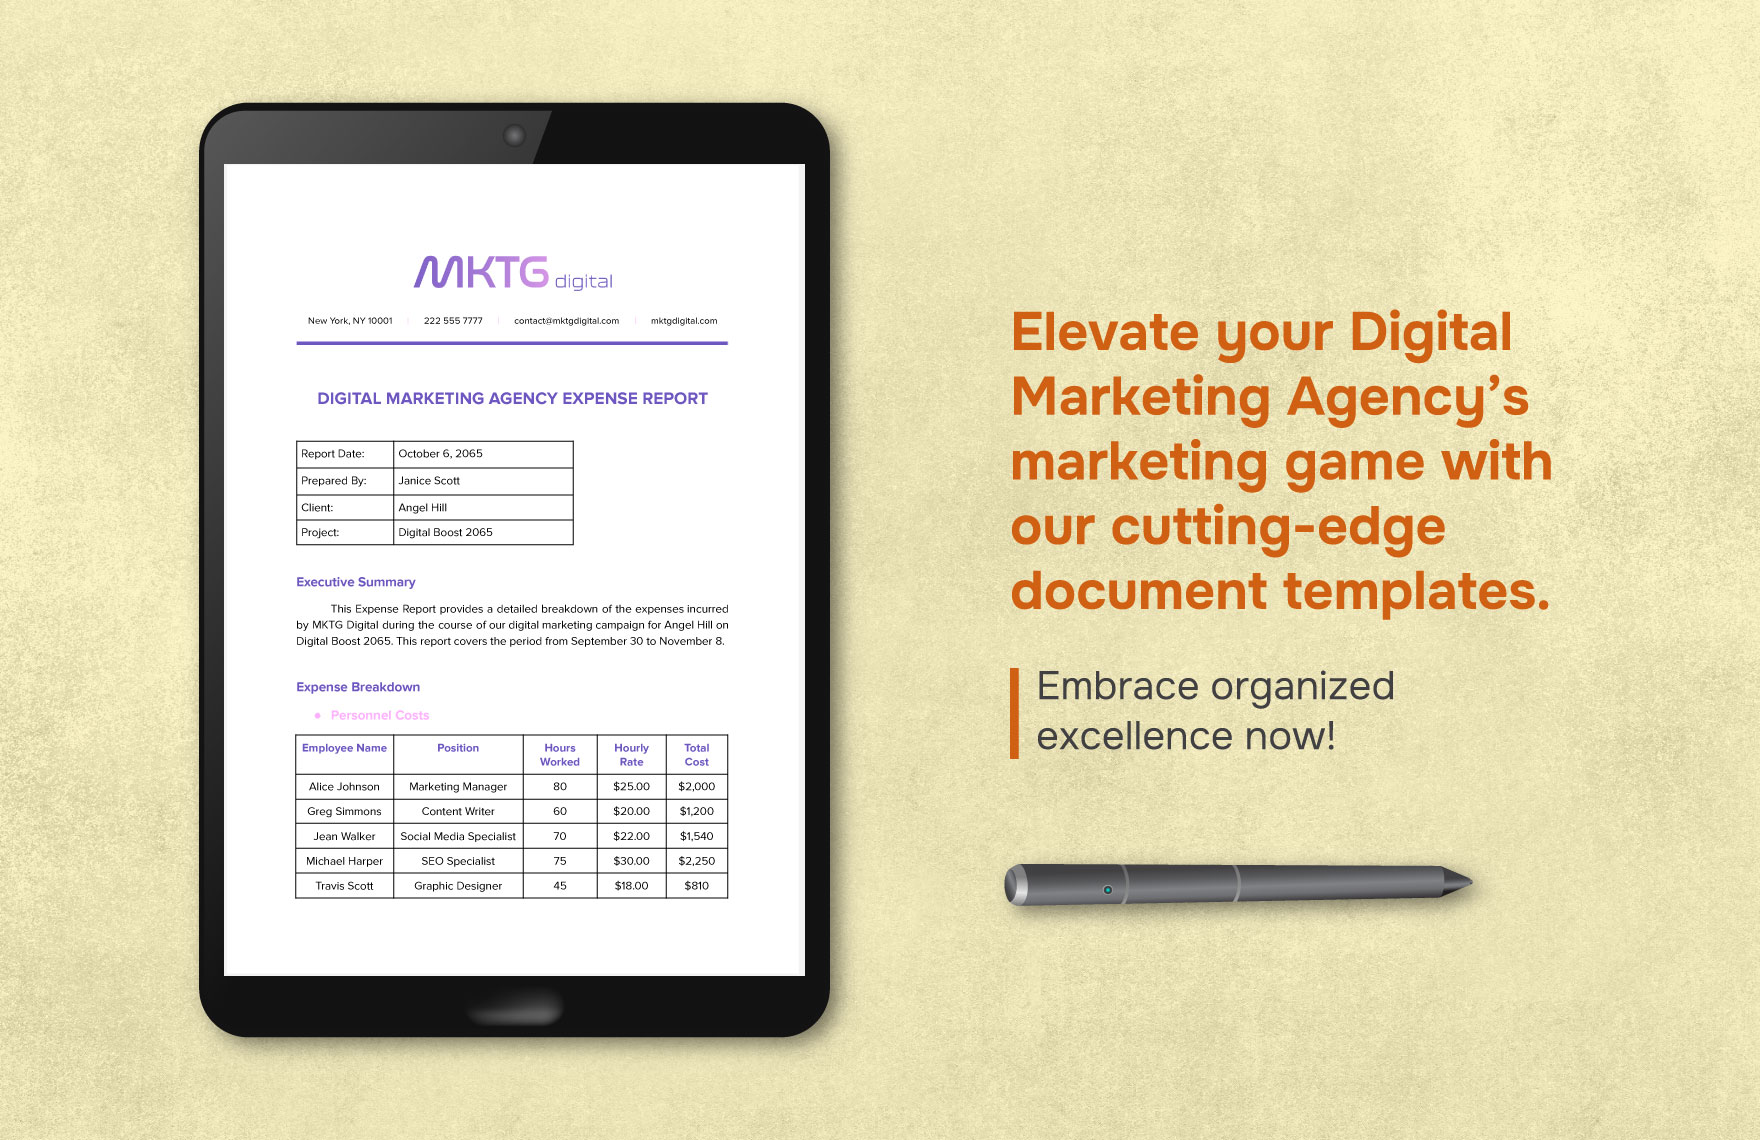 Digital Marketing Agency Expense Report Template